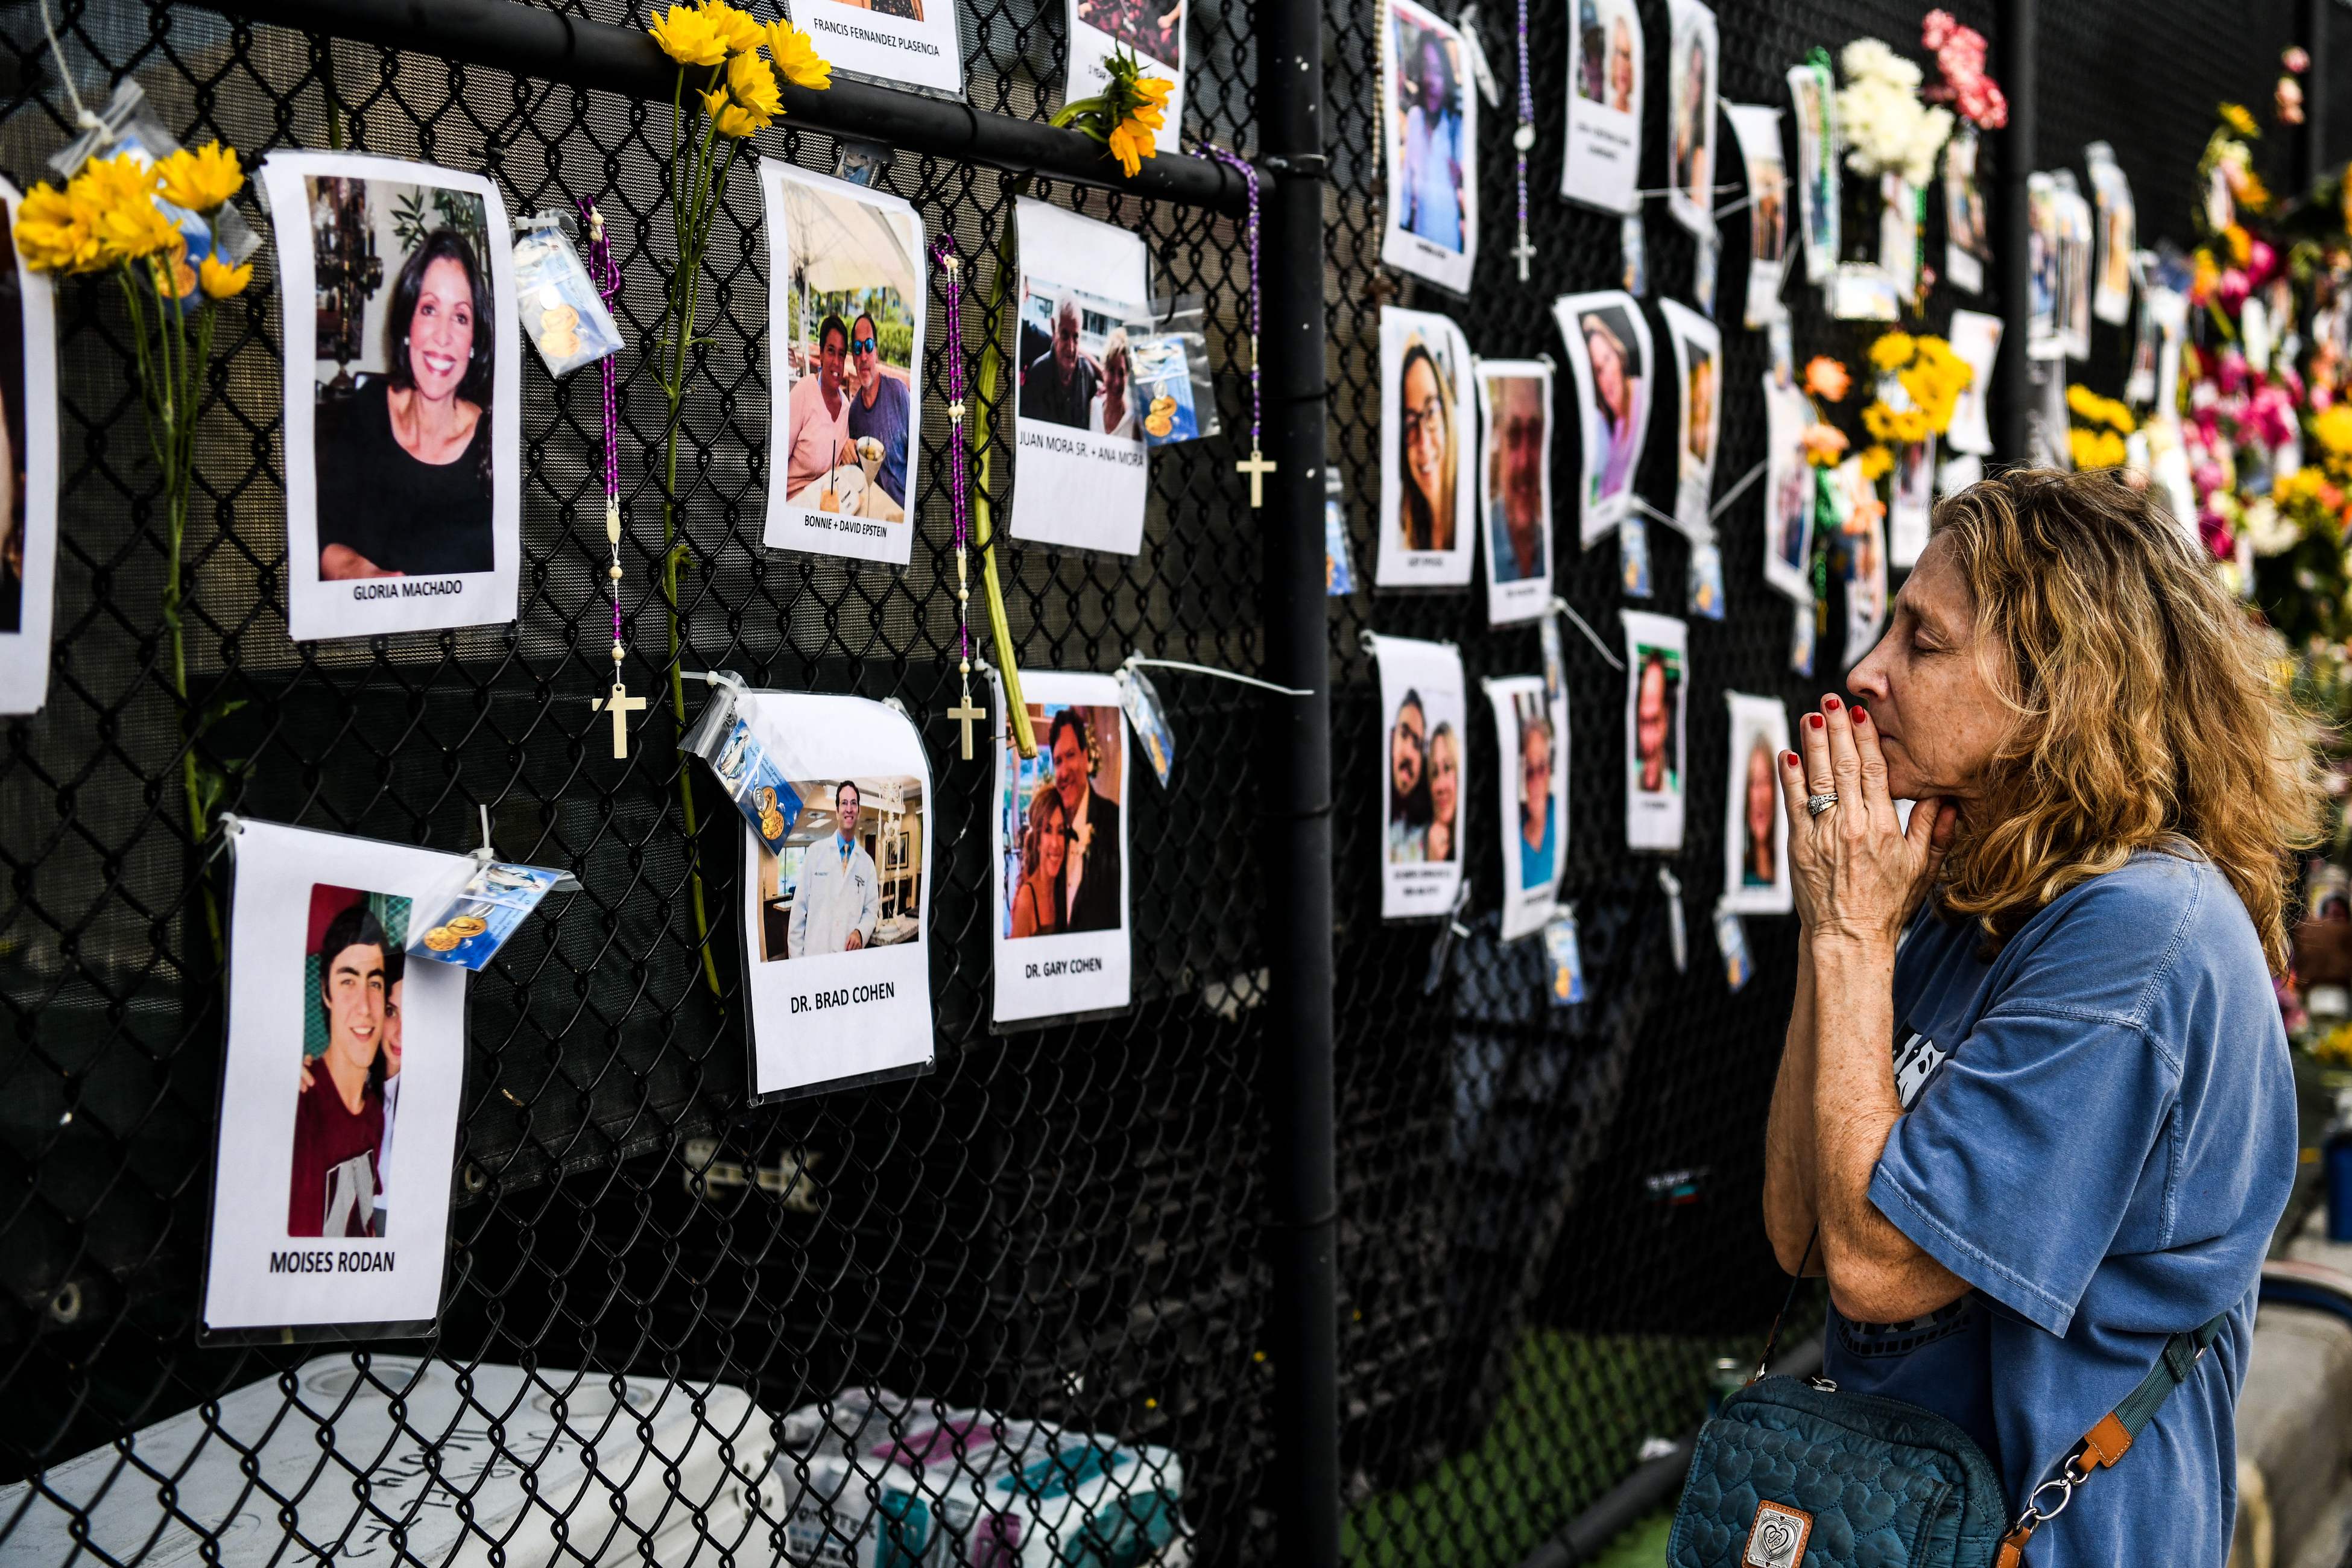 A woman prays in front of photos at the makeshift memorial for the victims of the building collapse, near the site of the accident in Surfside, Fla., north of Miami Beach on June 27, 2021.